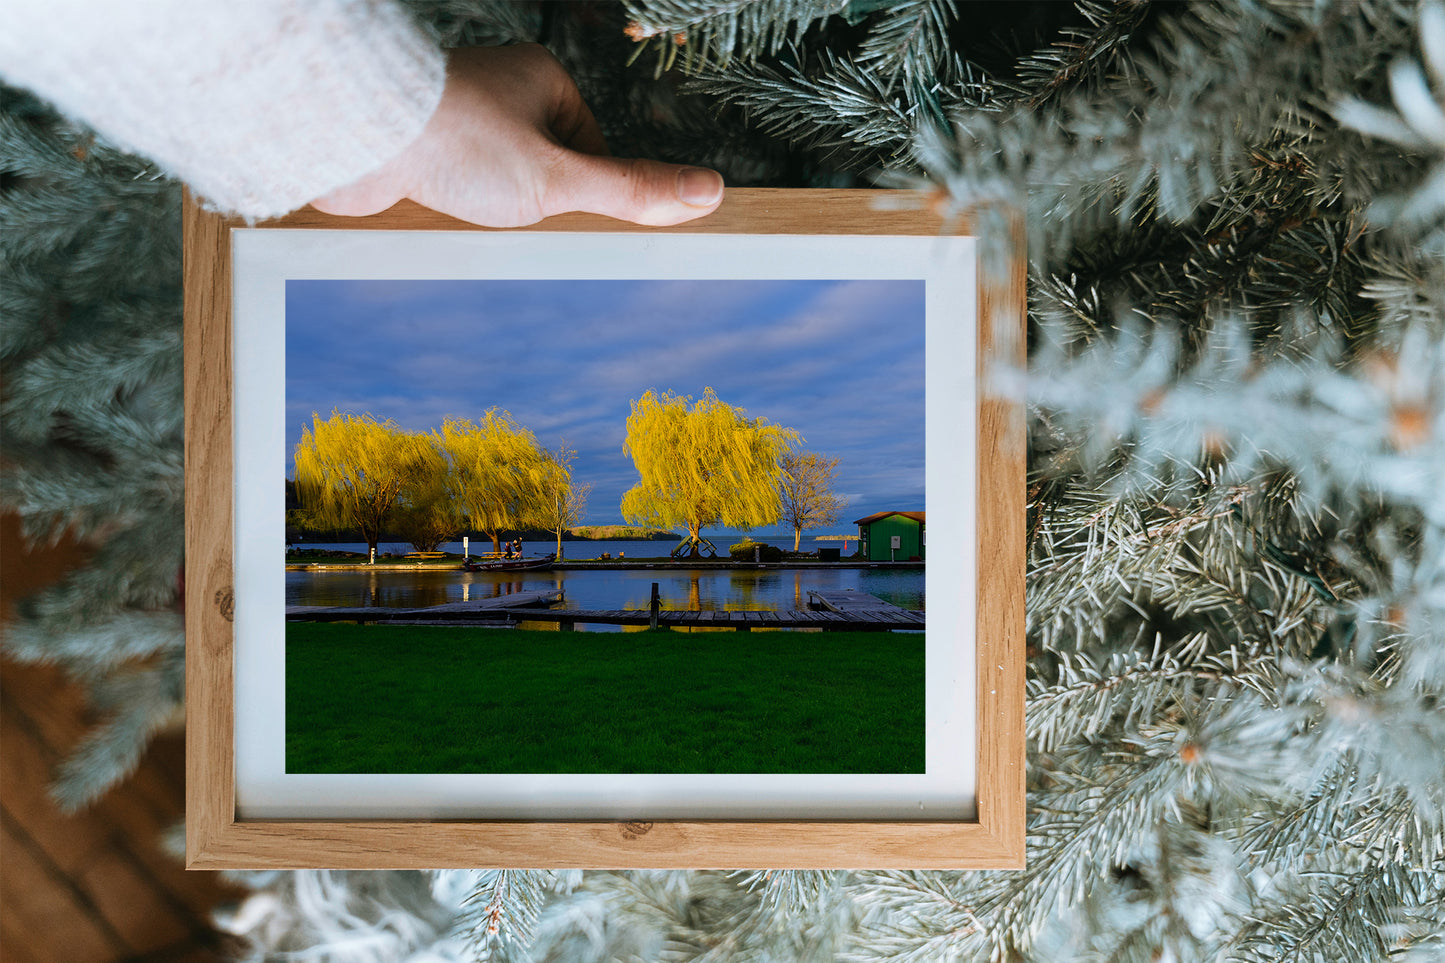 Photographic Print: "Golden Willows"